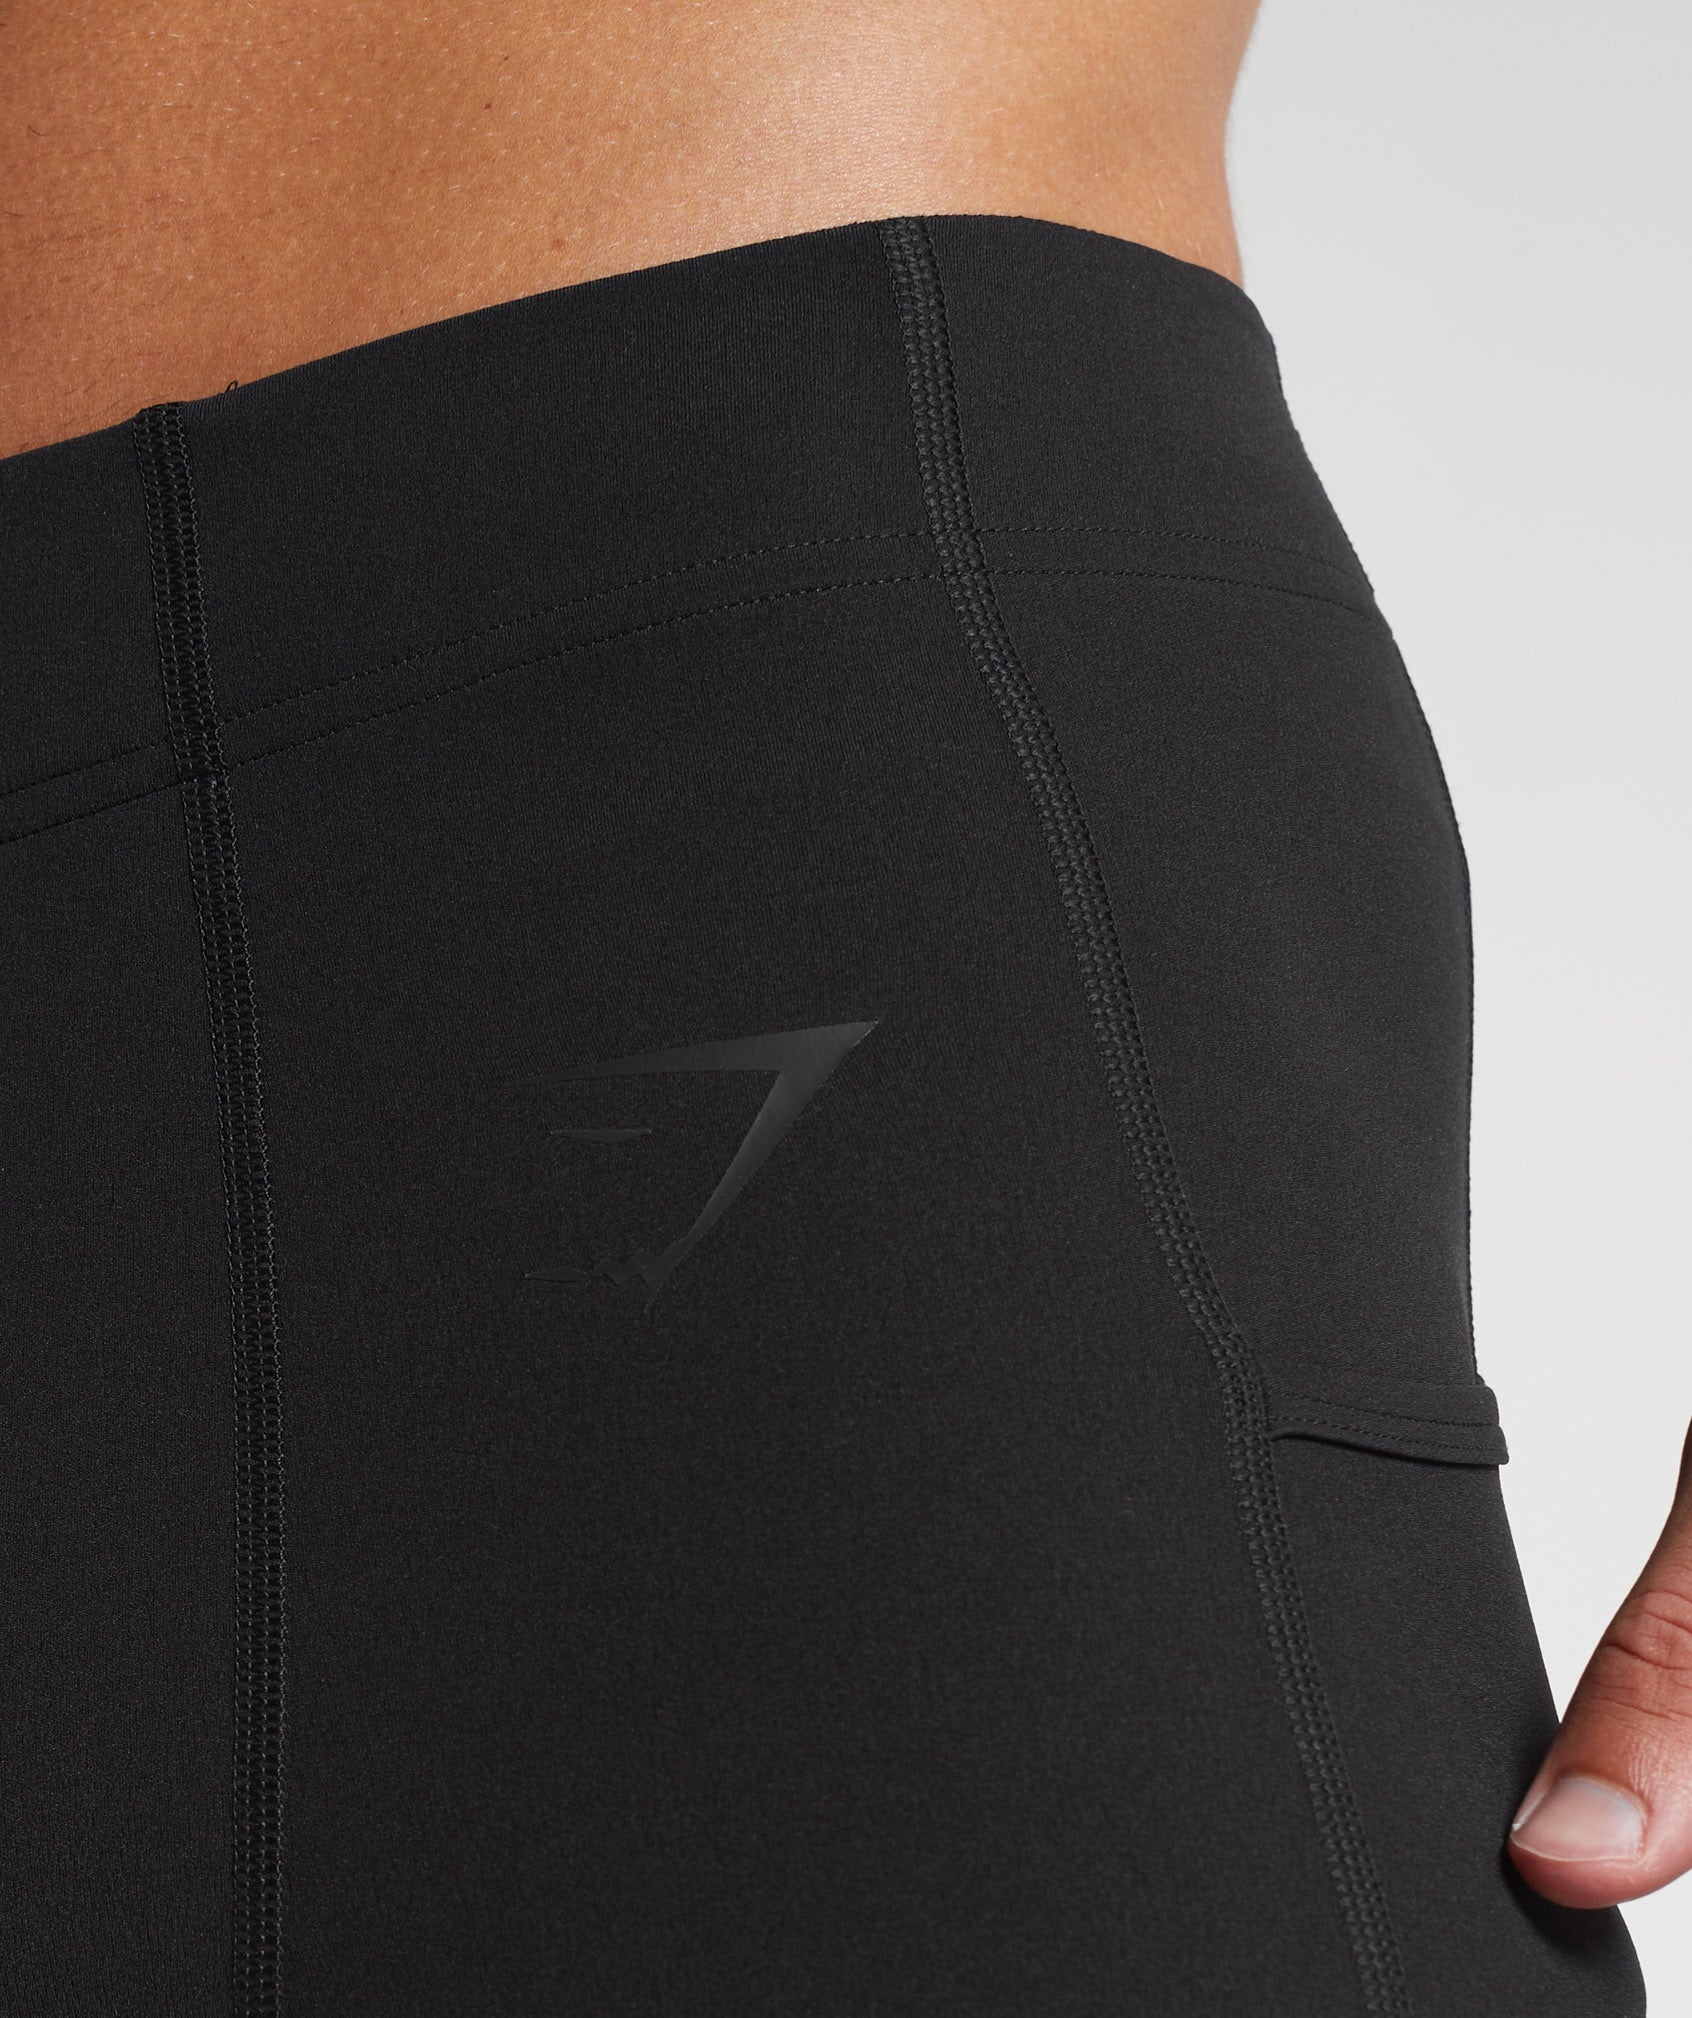 Base Layers - Gymshark Products For Sale - Mcvallescrivia